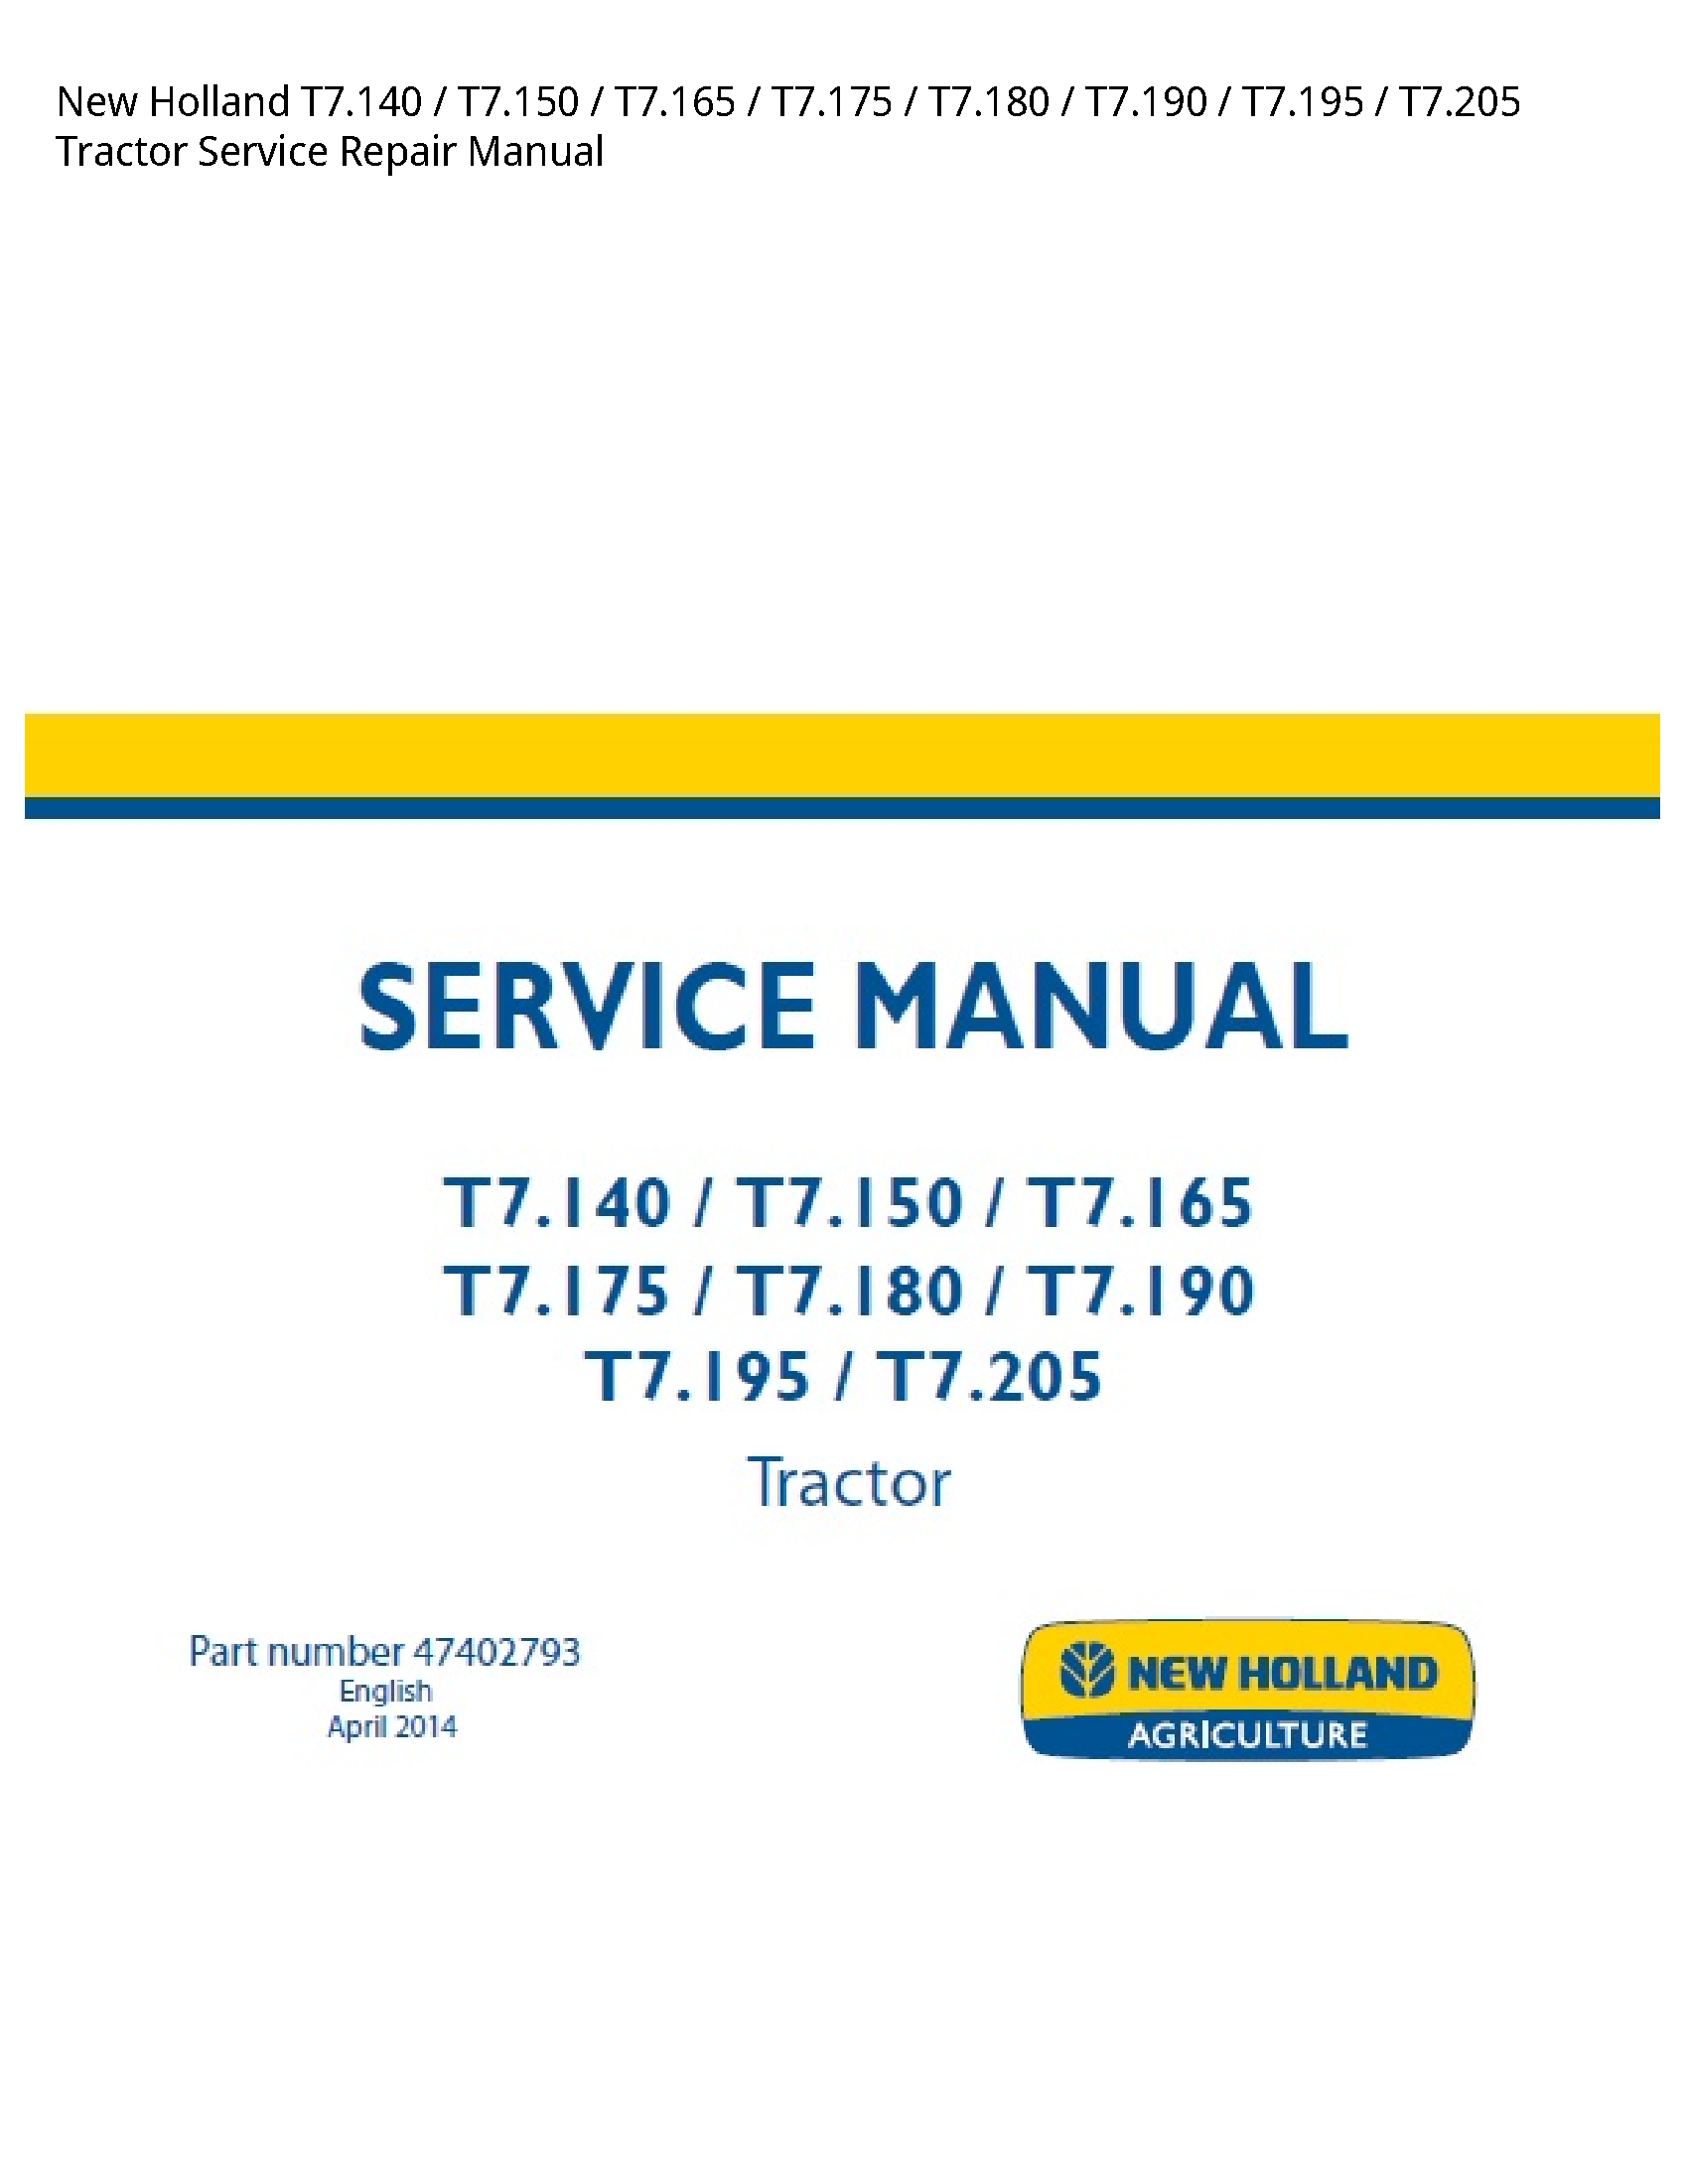 New Holland T7.140 Tractor manual